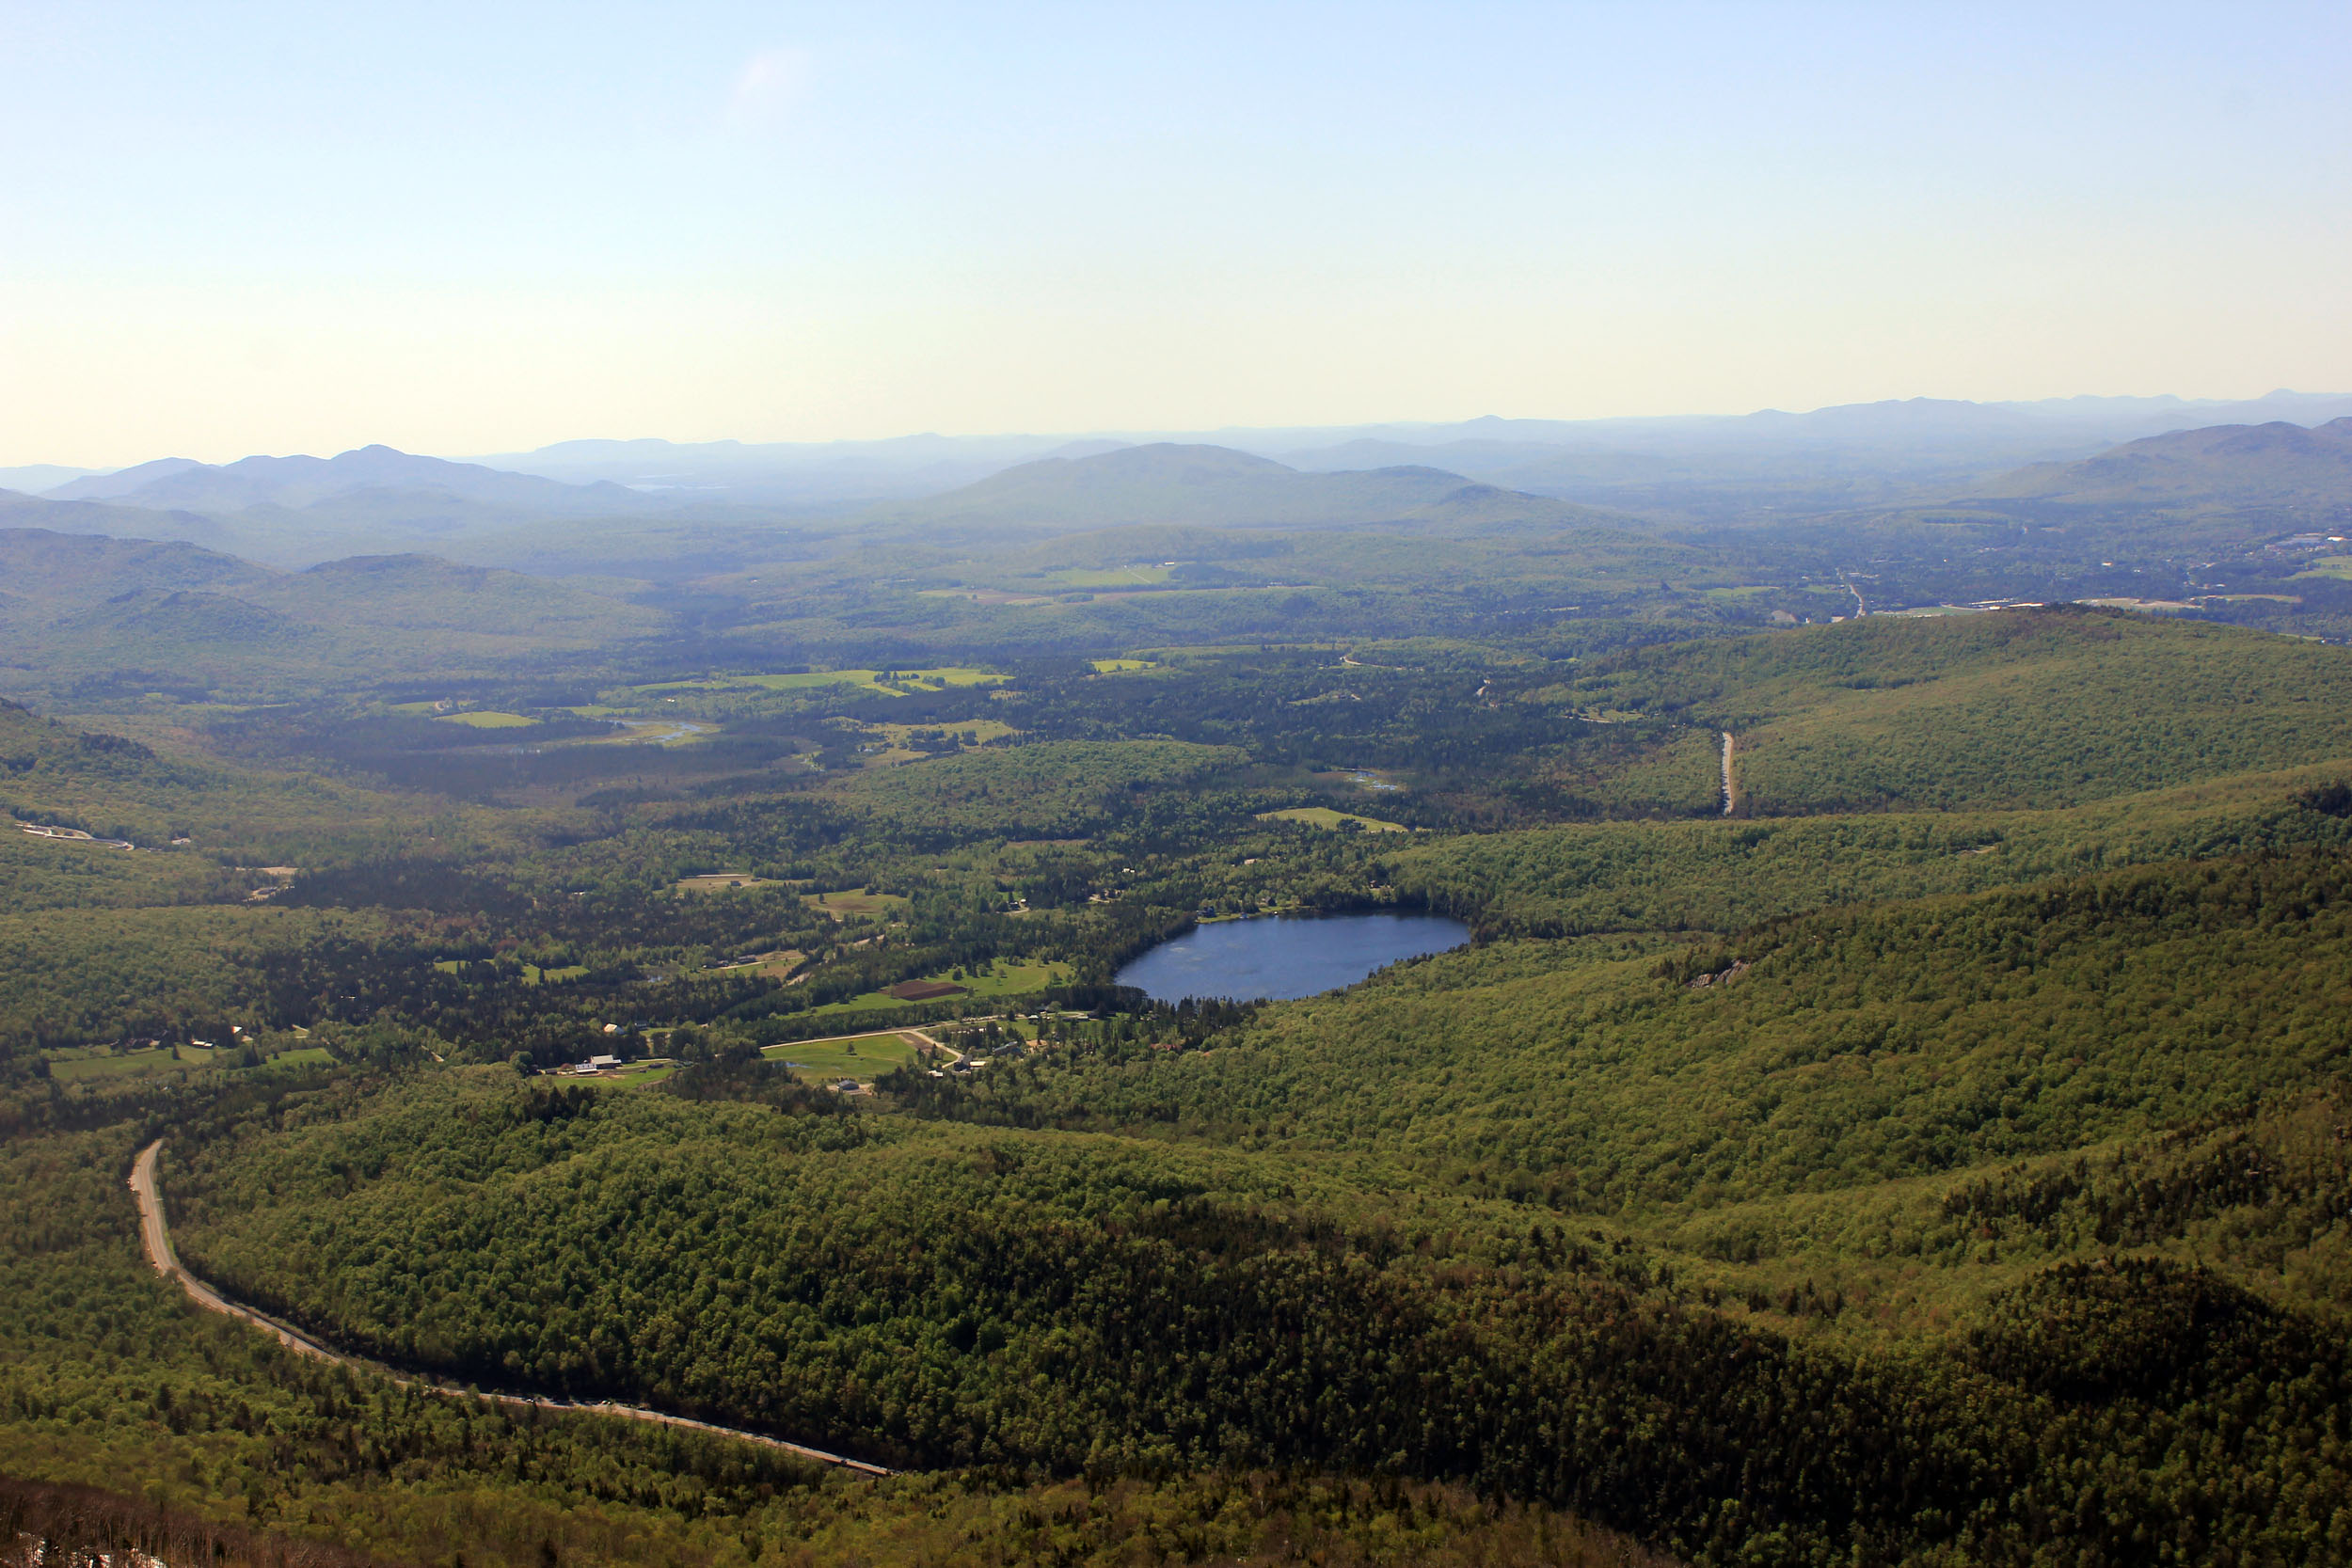 File:Gfp-new-york-view-from-cascade-mountain.jpg - Wikimedia Commons